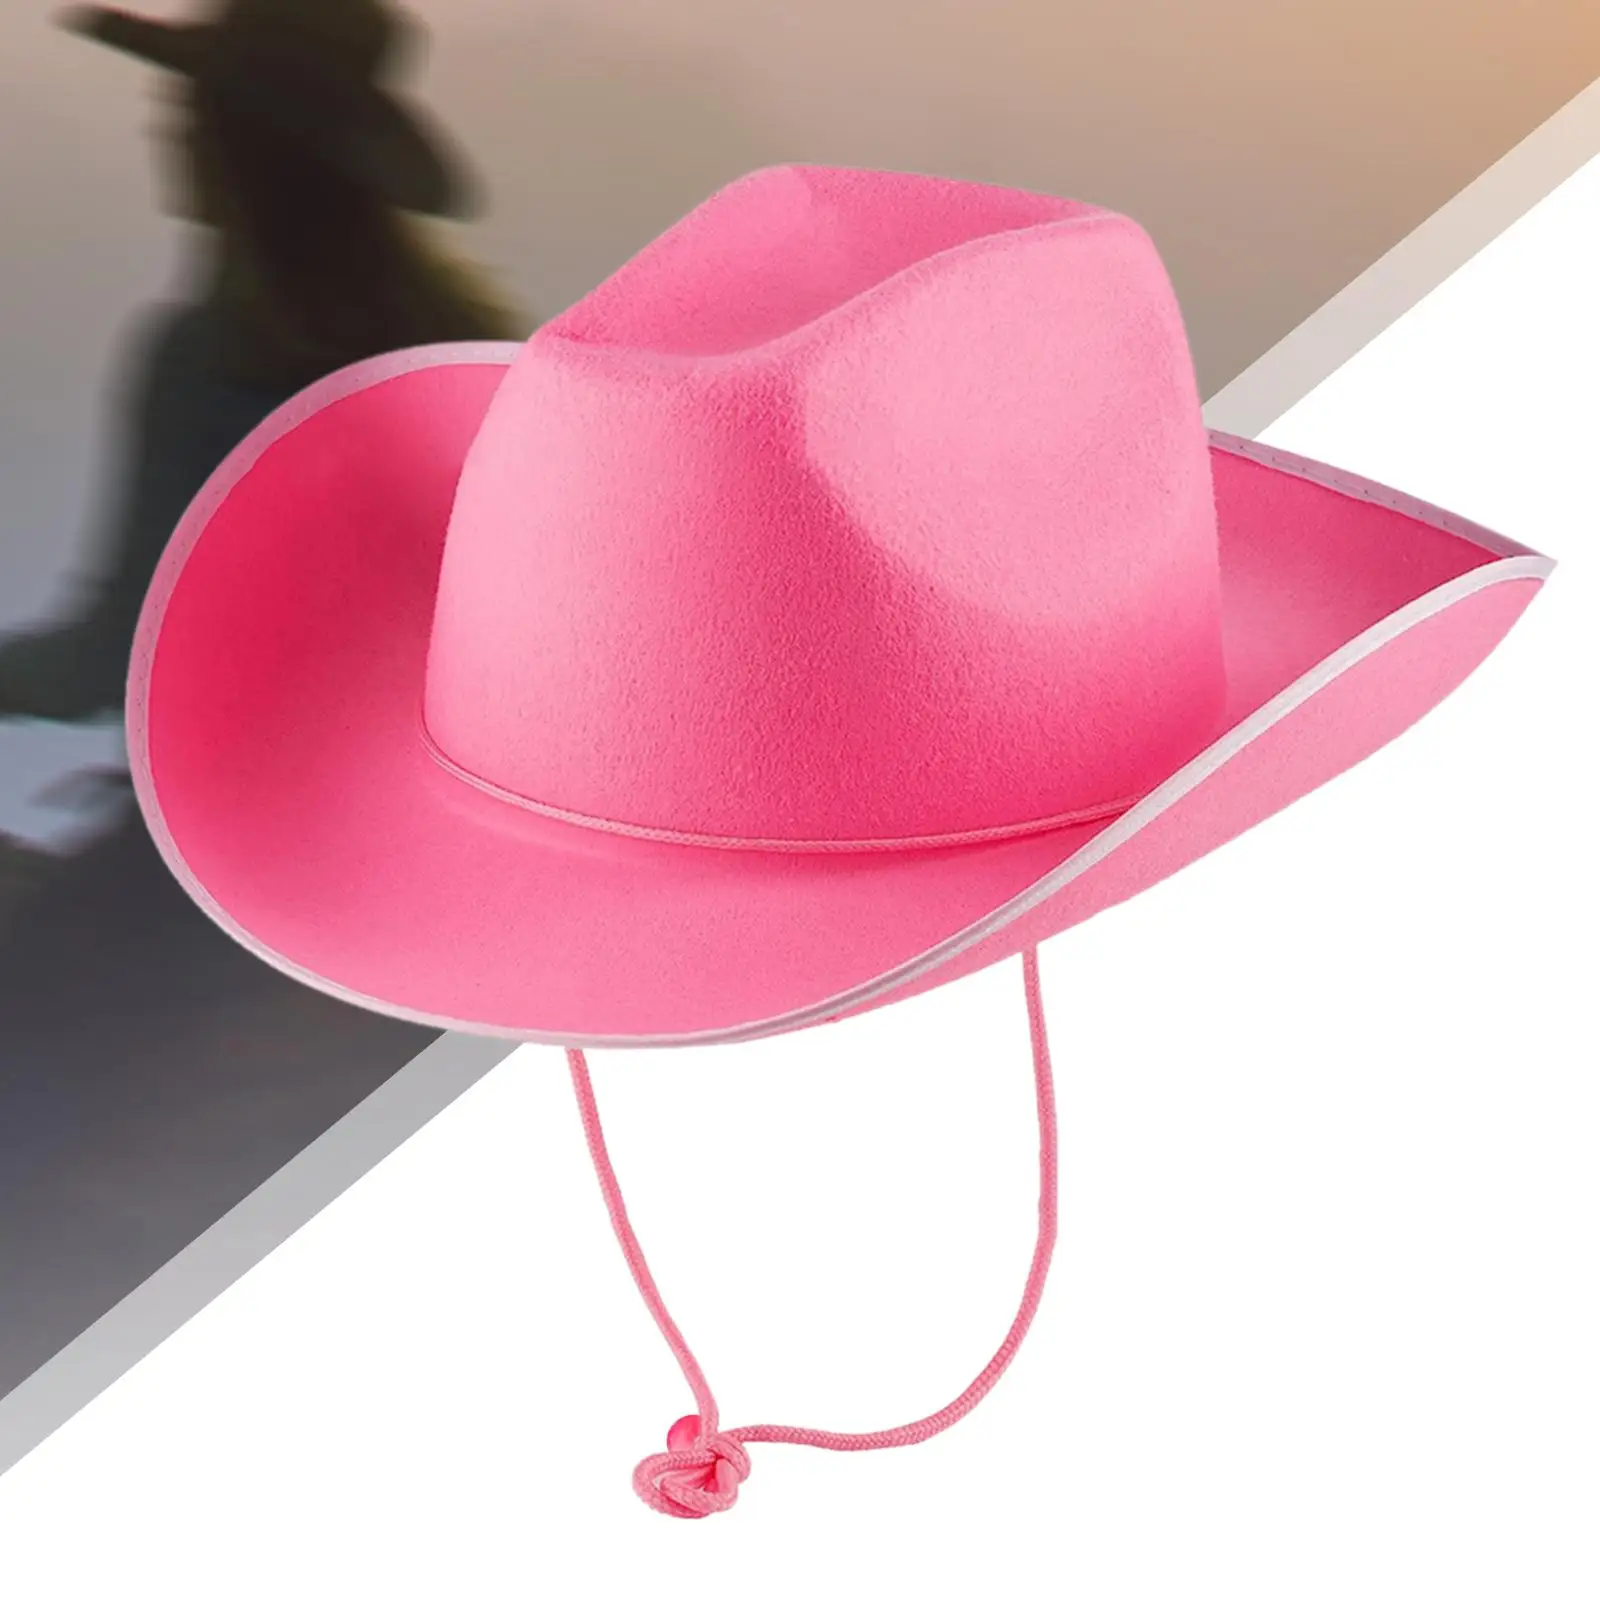 Cowboy Hat Warped Cowgirl Hats for Stage Performance Unisex Adults Men Women